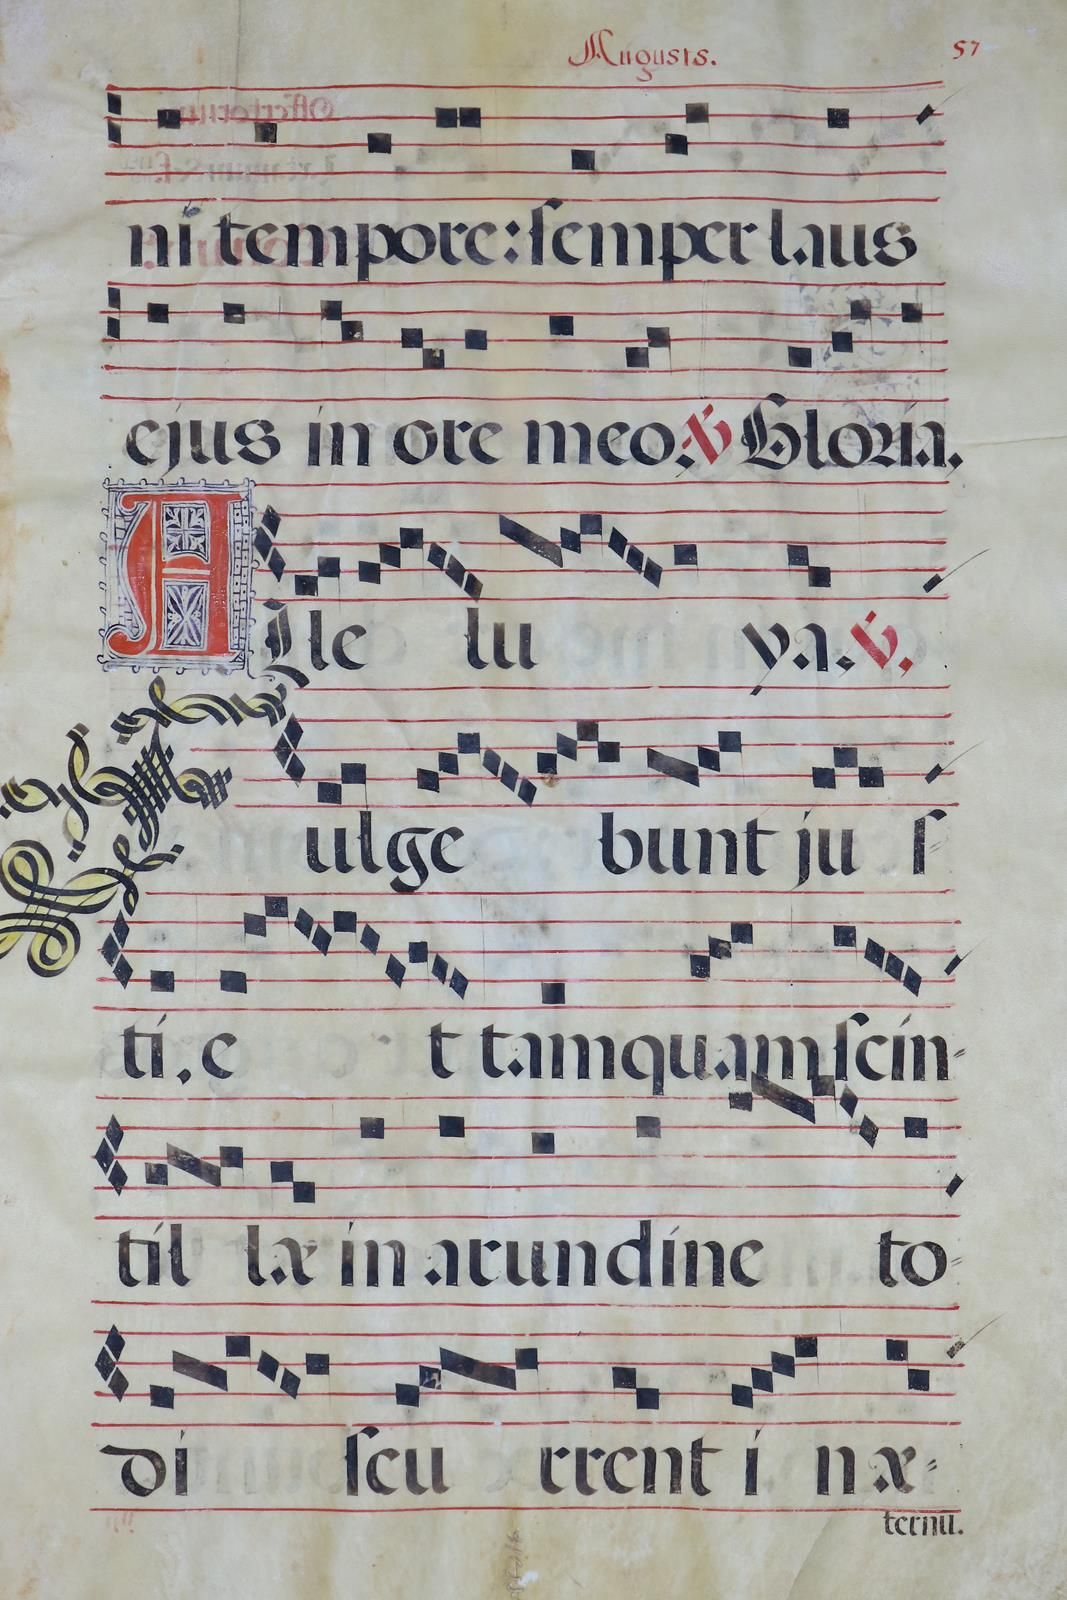 Antiphonar. 2 vols. (contiguous) from an antiphonary, c. 1500. Parchment. Latin &hellip;